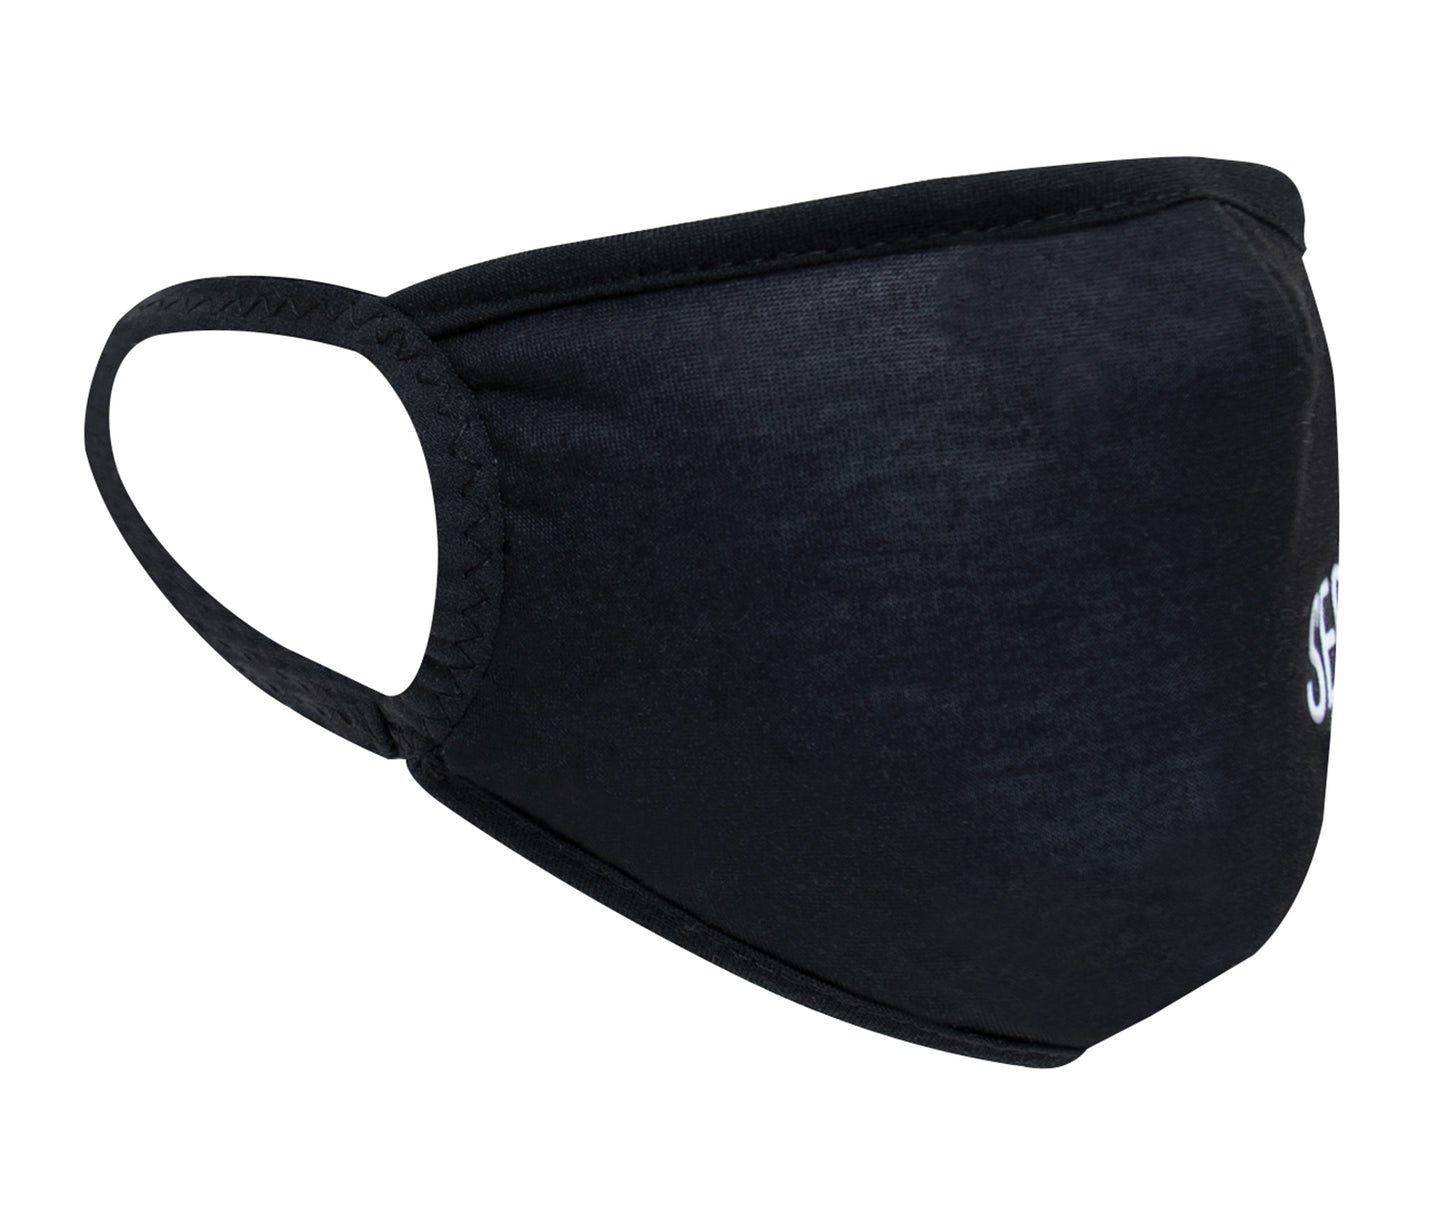 Rothco Reusable 3 Layer Facemask With Security Print